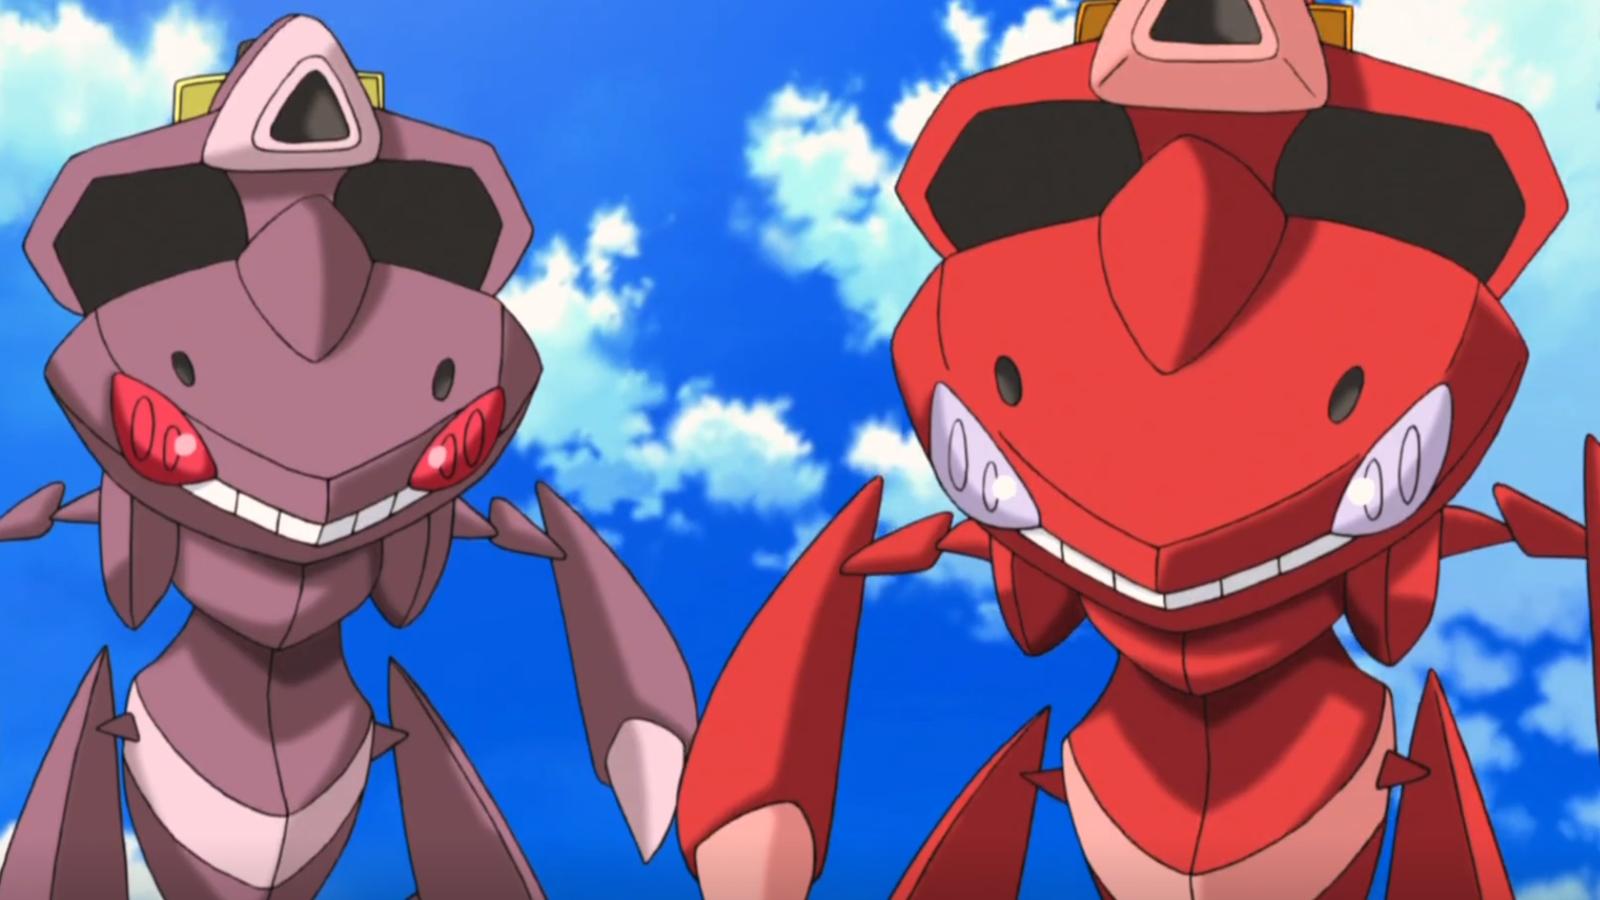 Genesect's normal and shiny variants as seen in Pokemon's 16th movie.